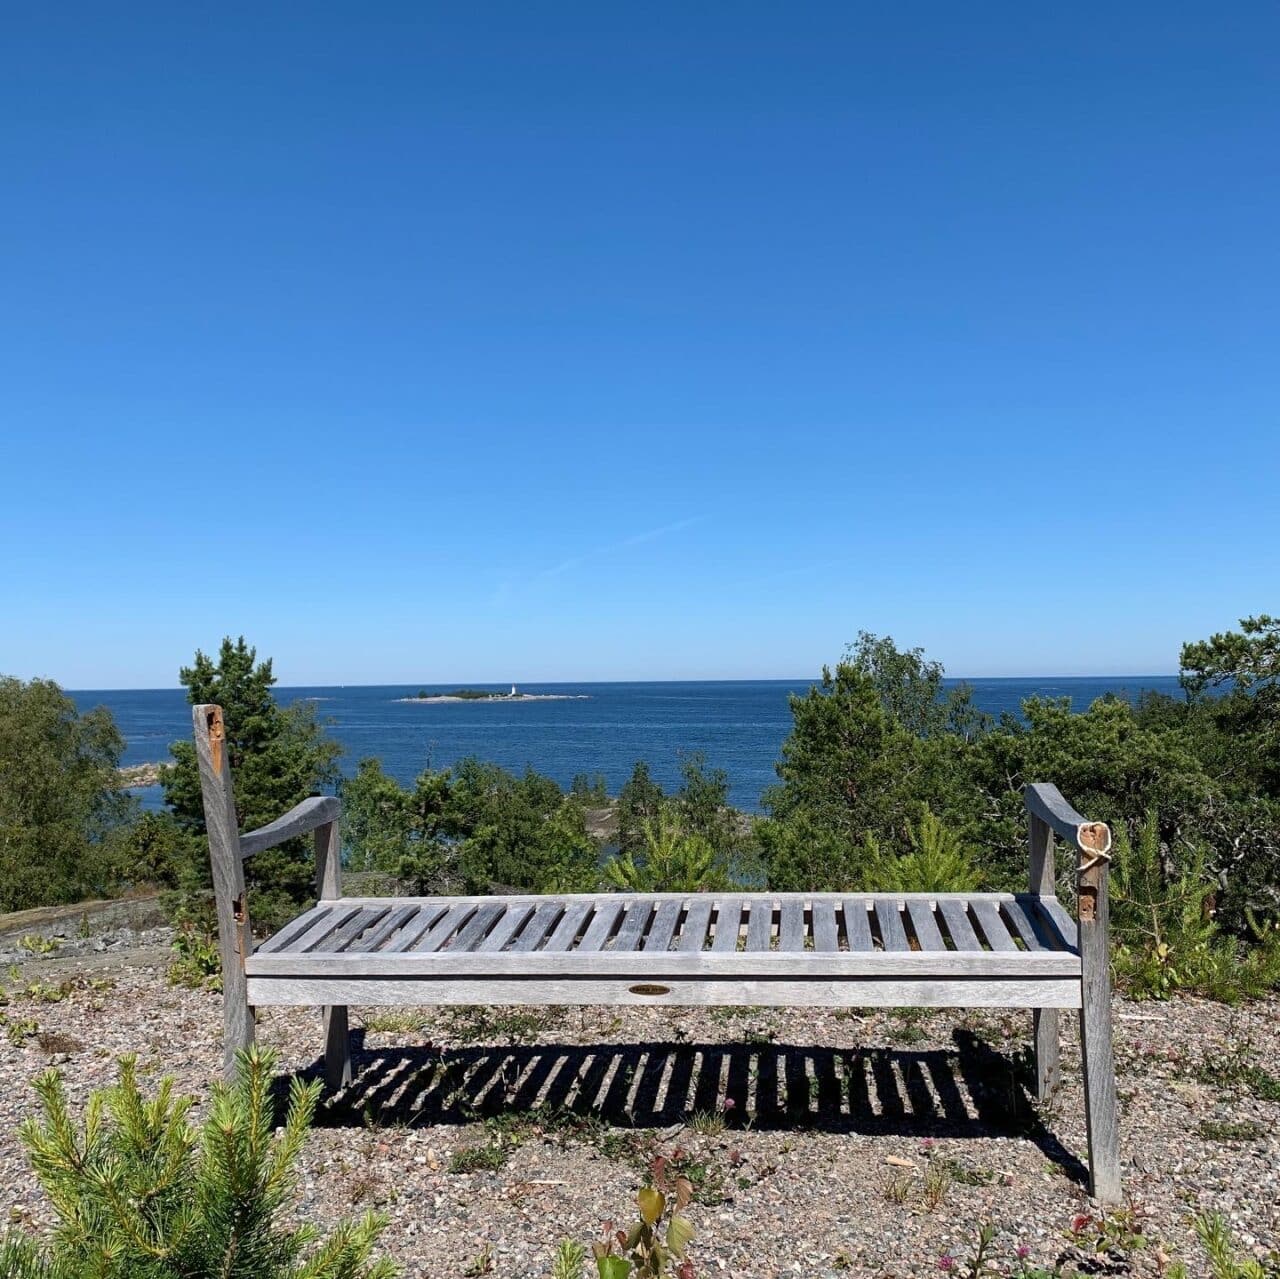 Viewpoint With Bench Overlooking The Sea And Island